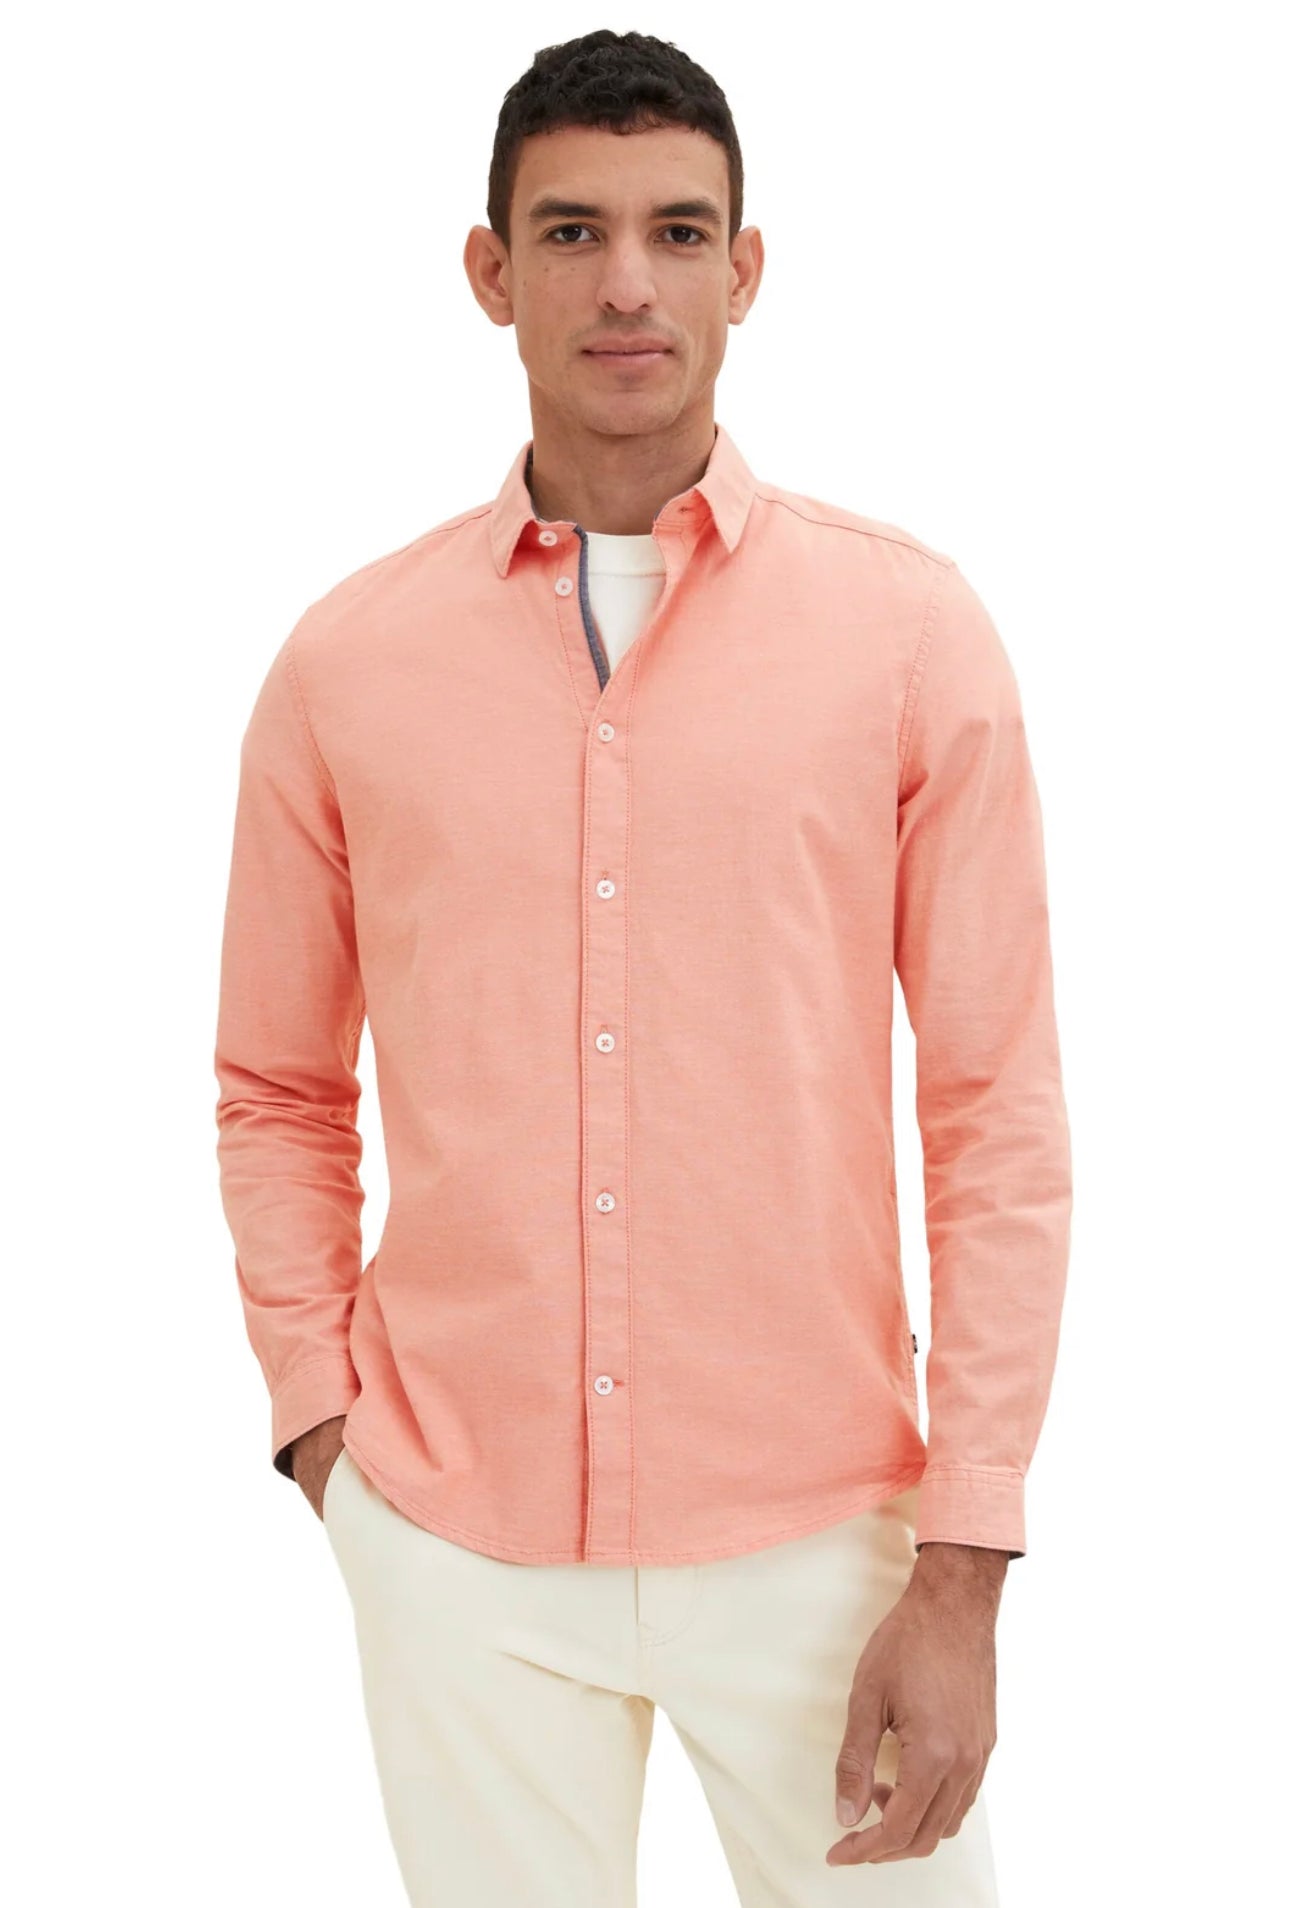 Fitted STEEL STYLE Stretch GARAGE Shirt Oxford –